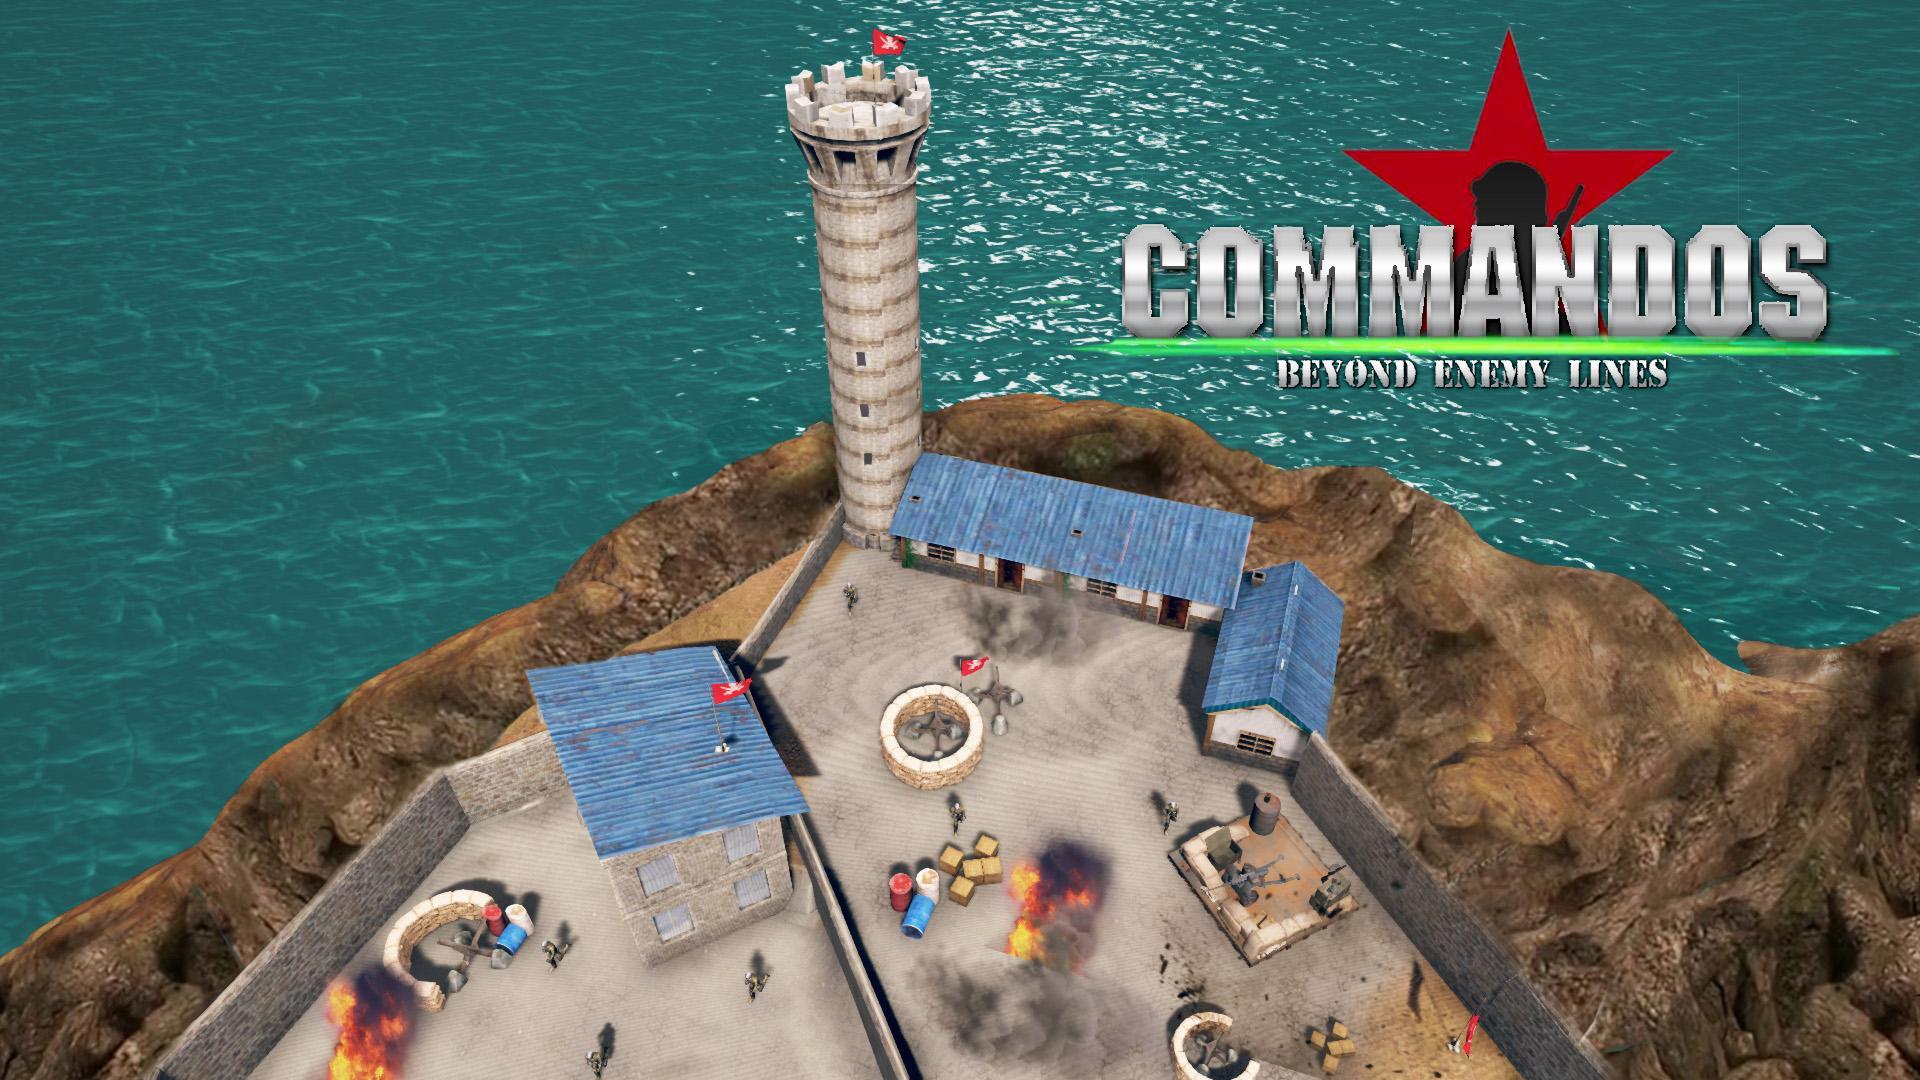 Commando Attack Enemy Lines Free Shooting Games For Android